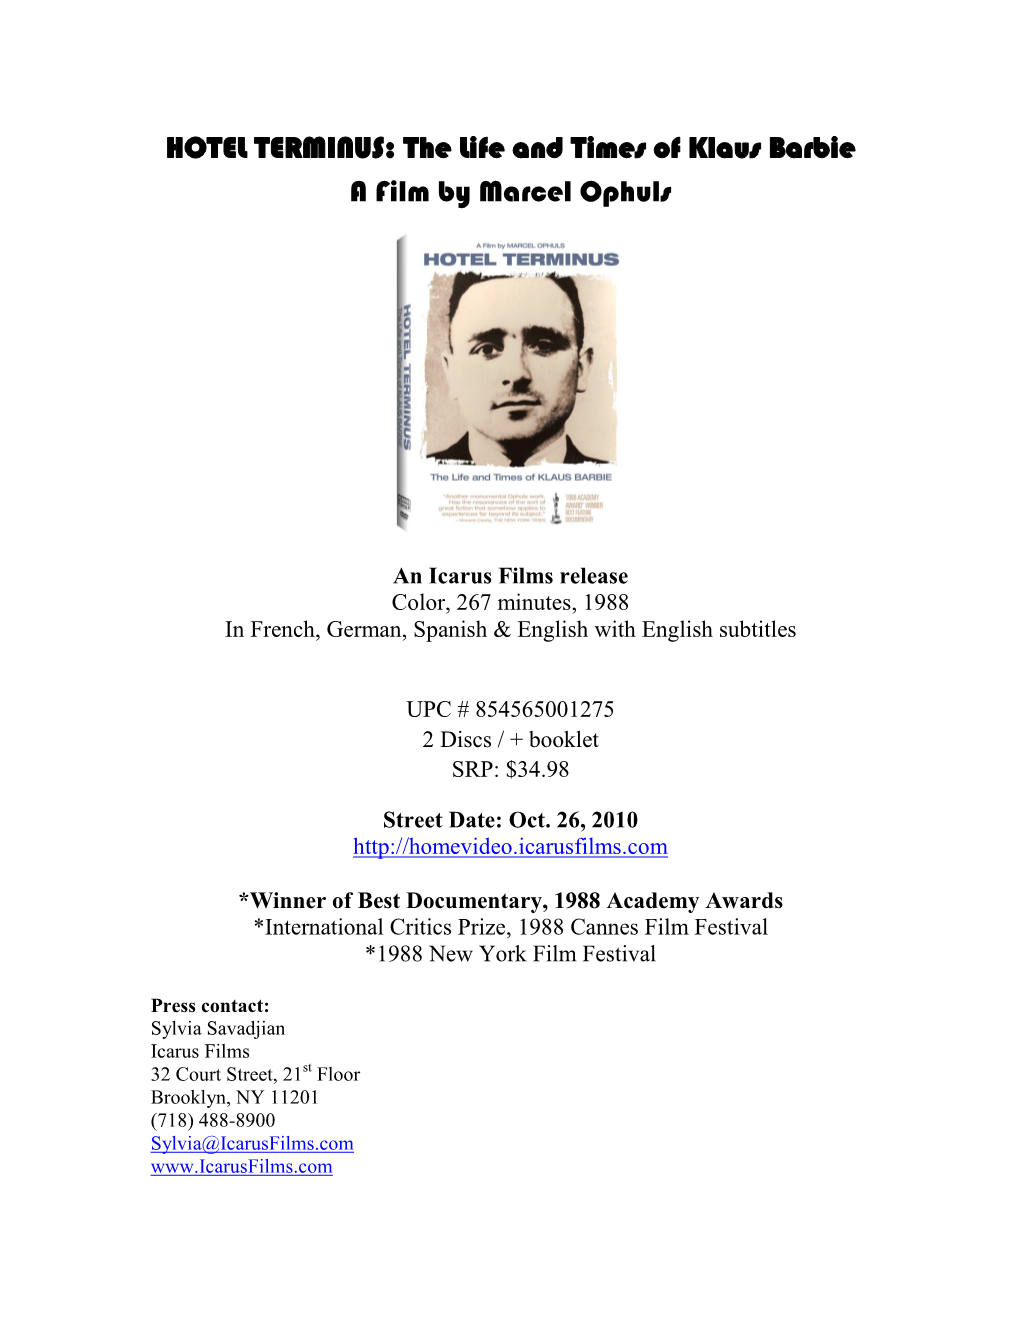 HOTEL TERMINUS: the Life and Times of Klaus Barbie a Film by Marcel Ophuls